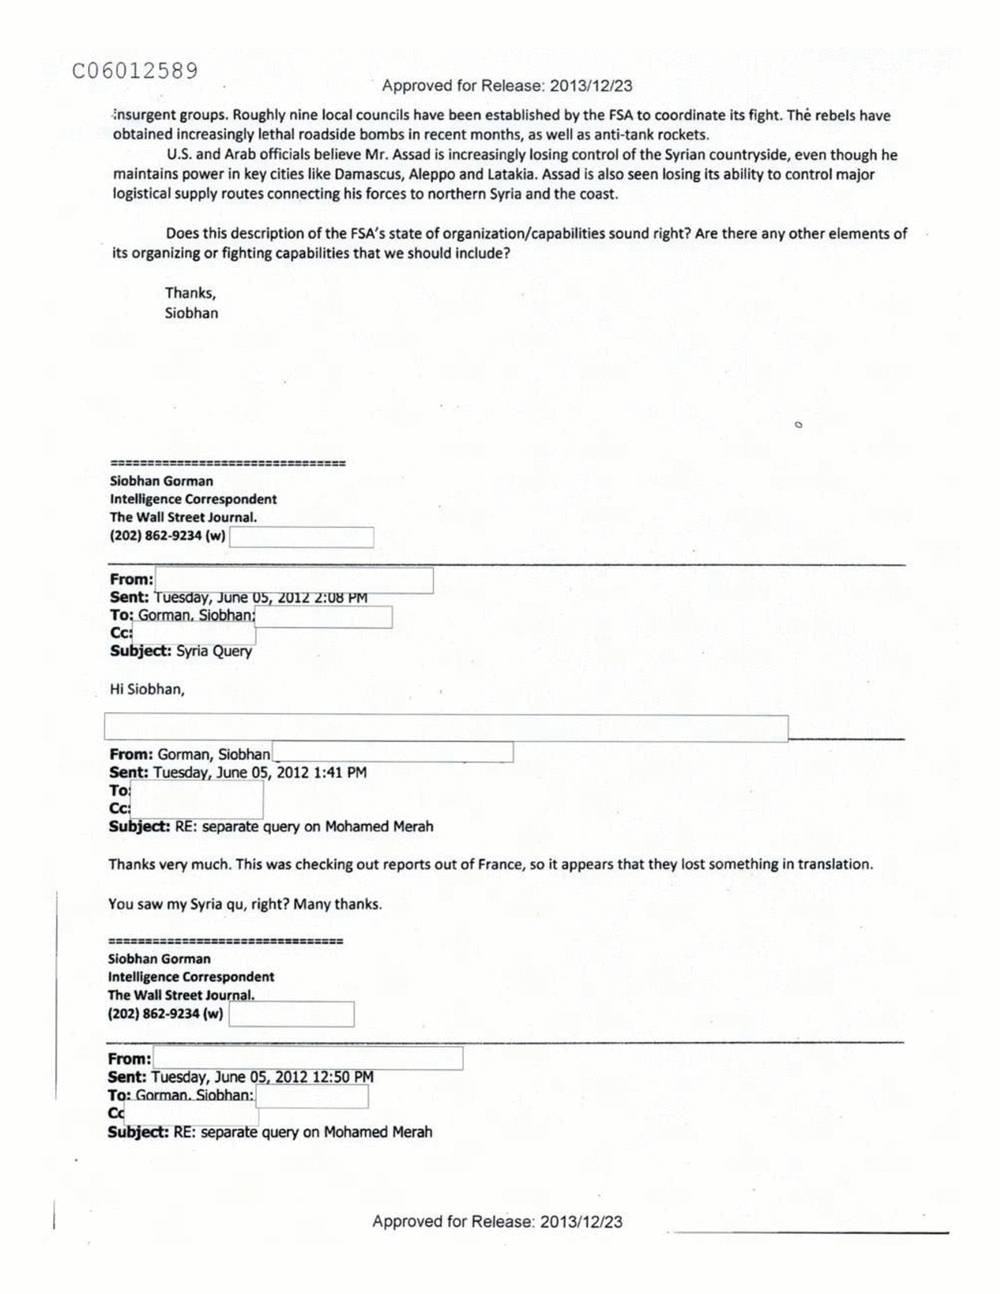 Page 139 from Email Correspondence Between Reporters and CIA Flacks